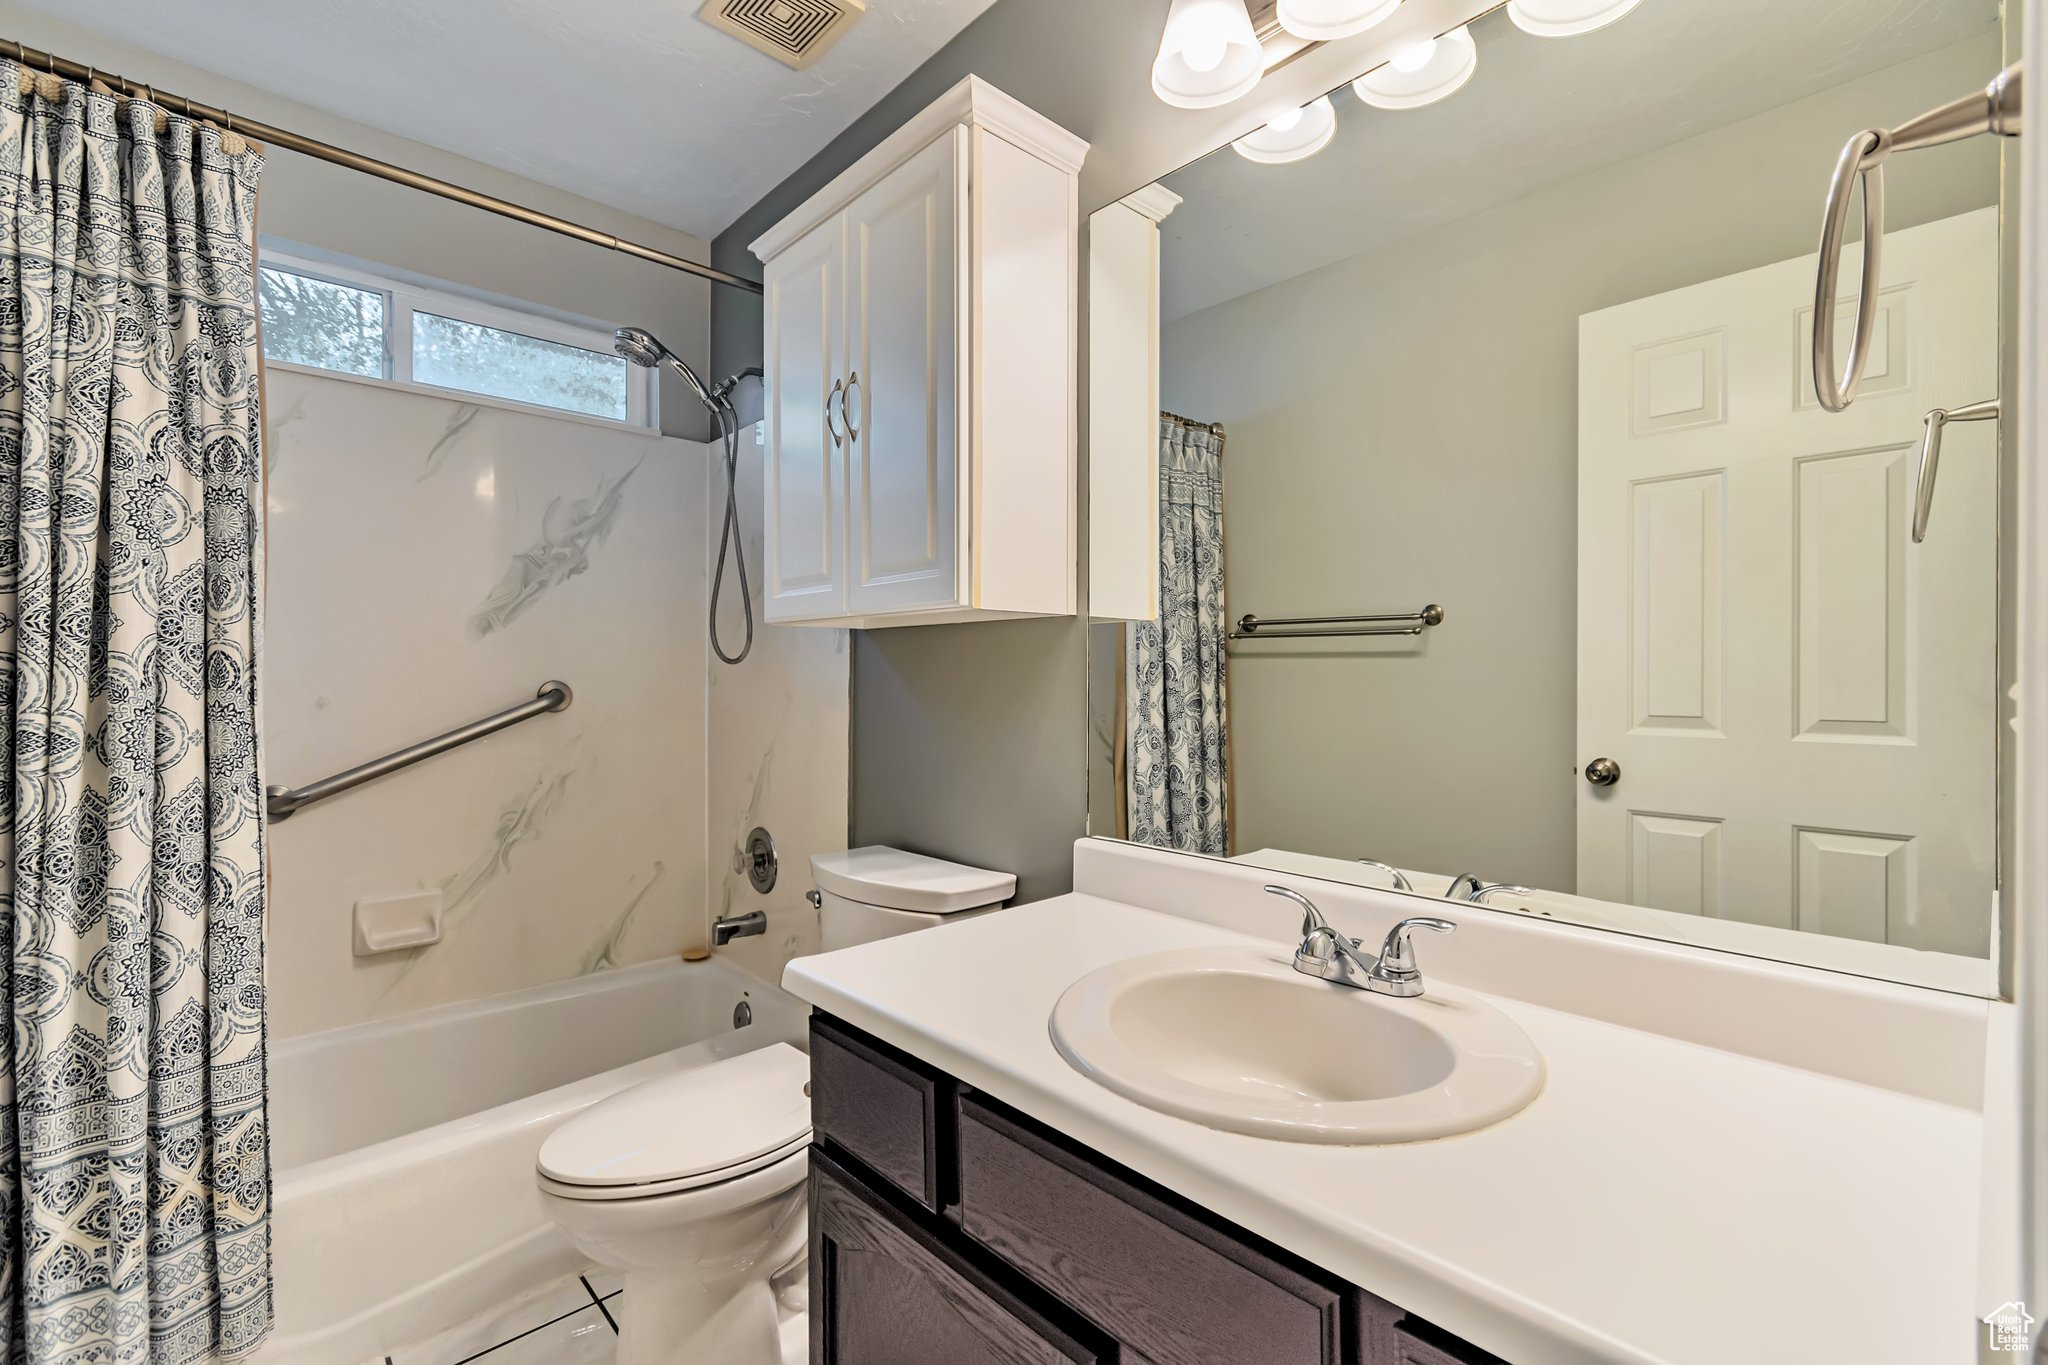 Full bathroom with large vanity, toilet, over the toilet storage, and shower / bath combo with grab bars.